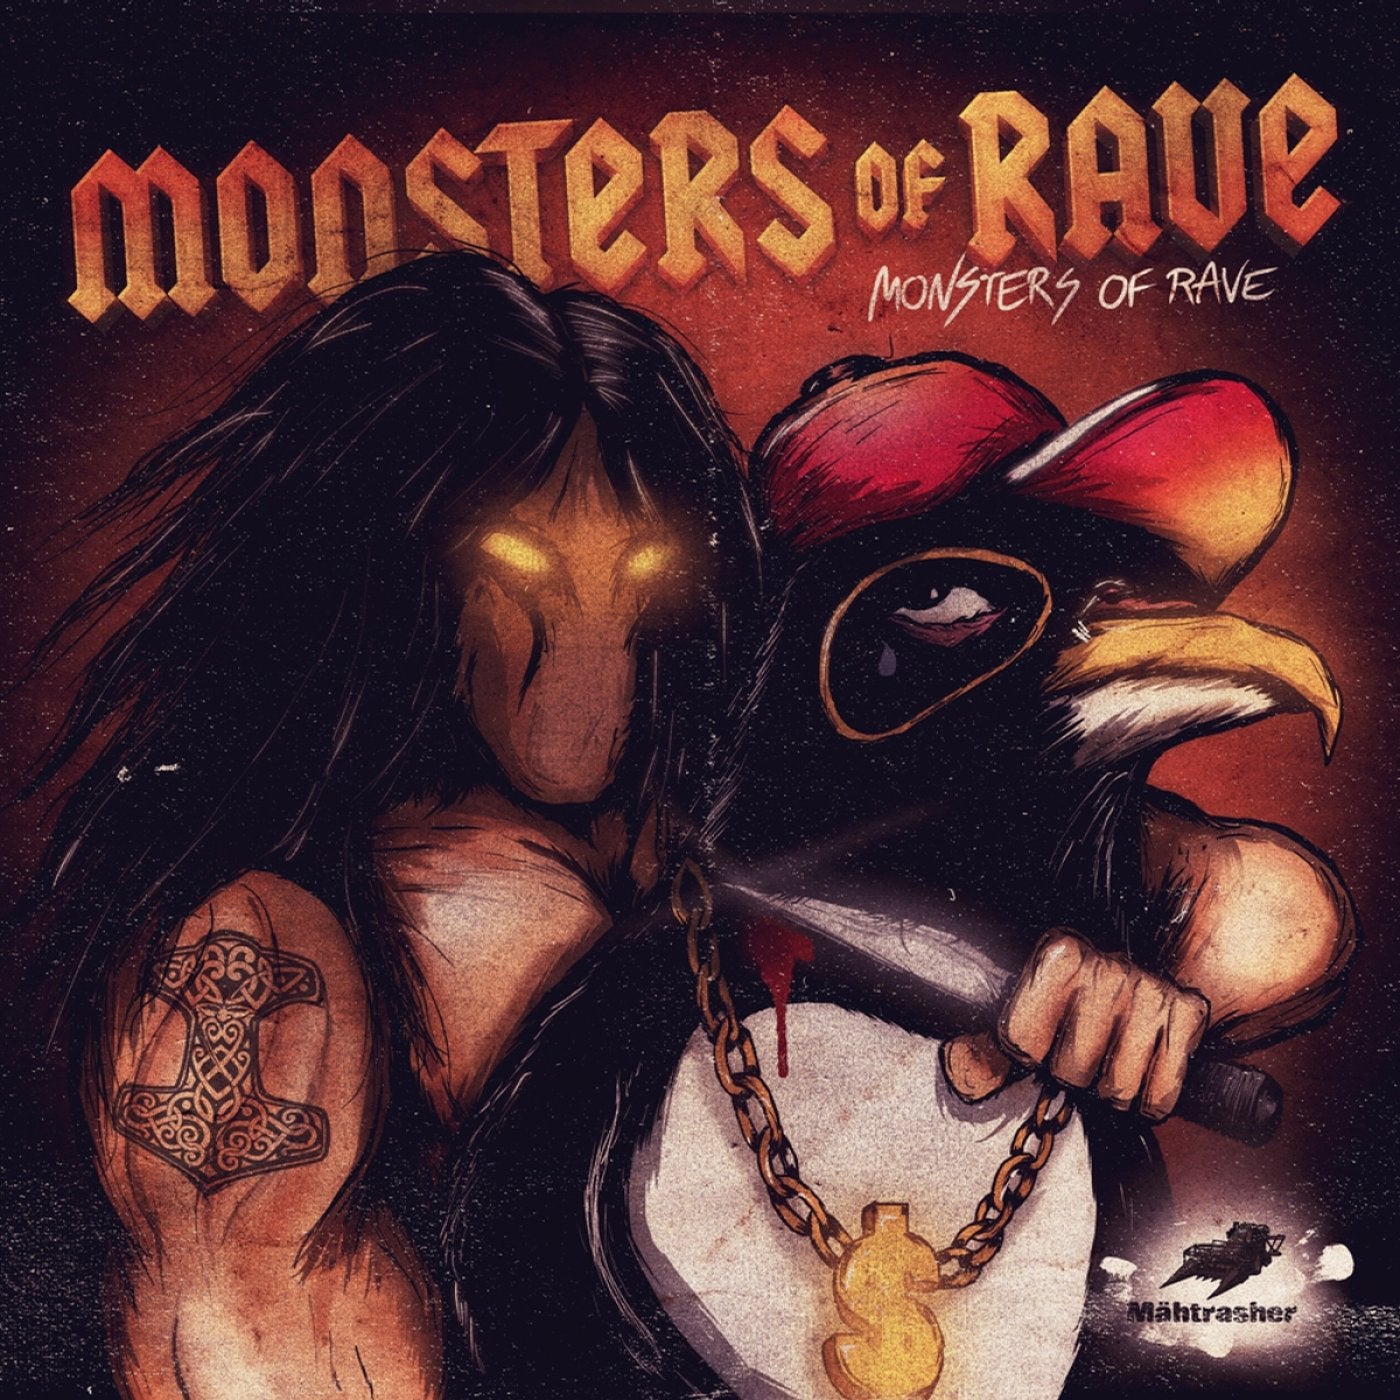 Monsters of Rave